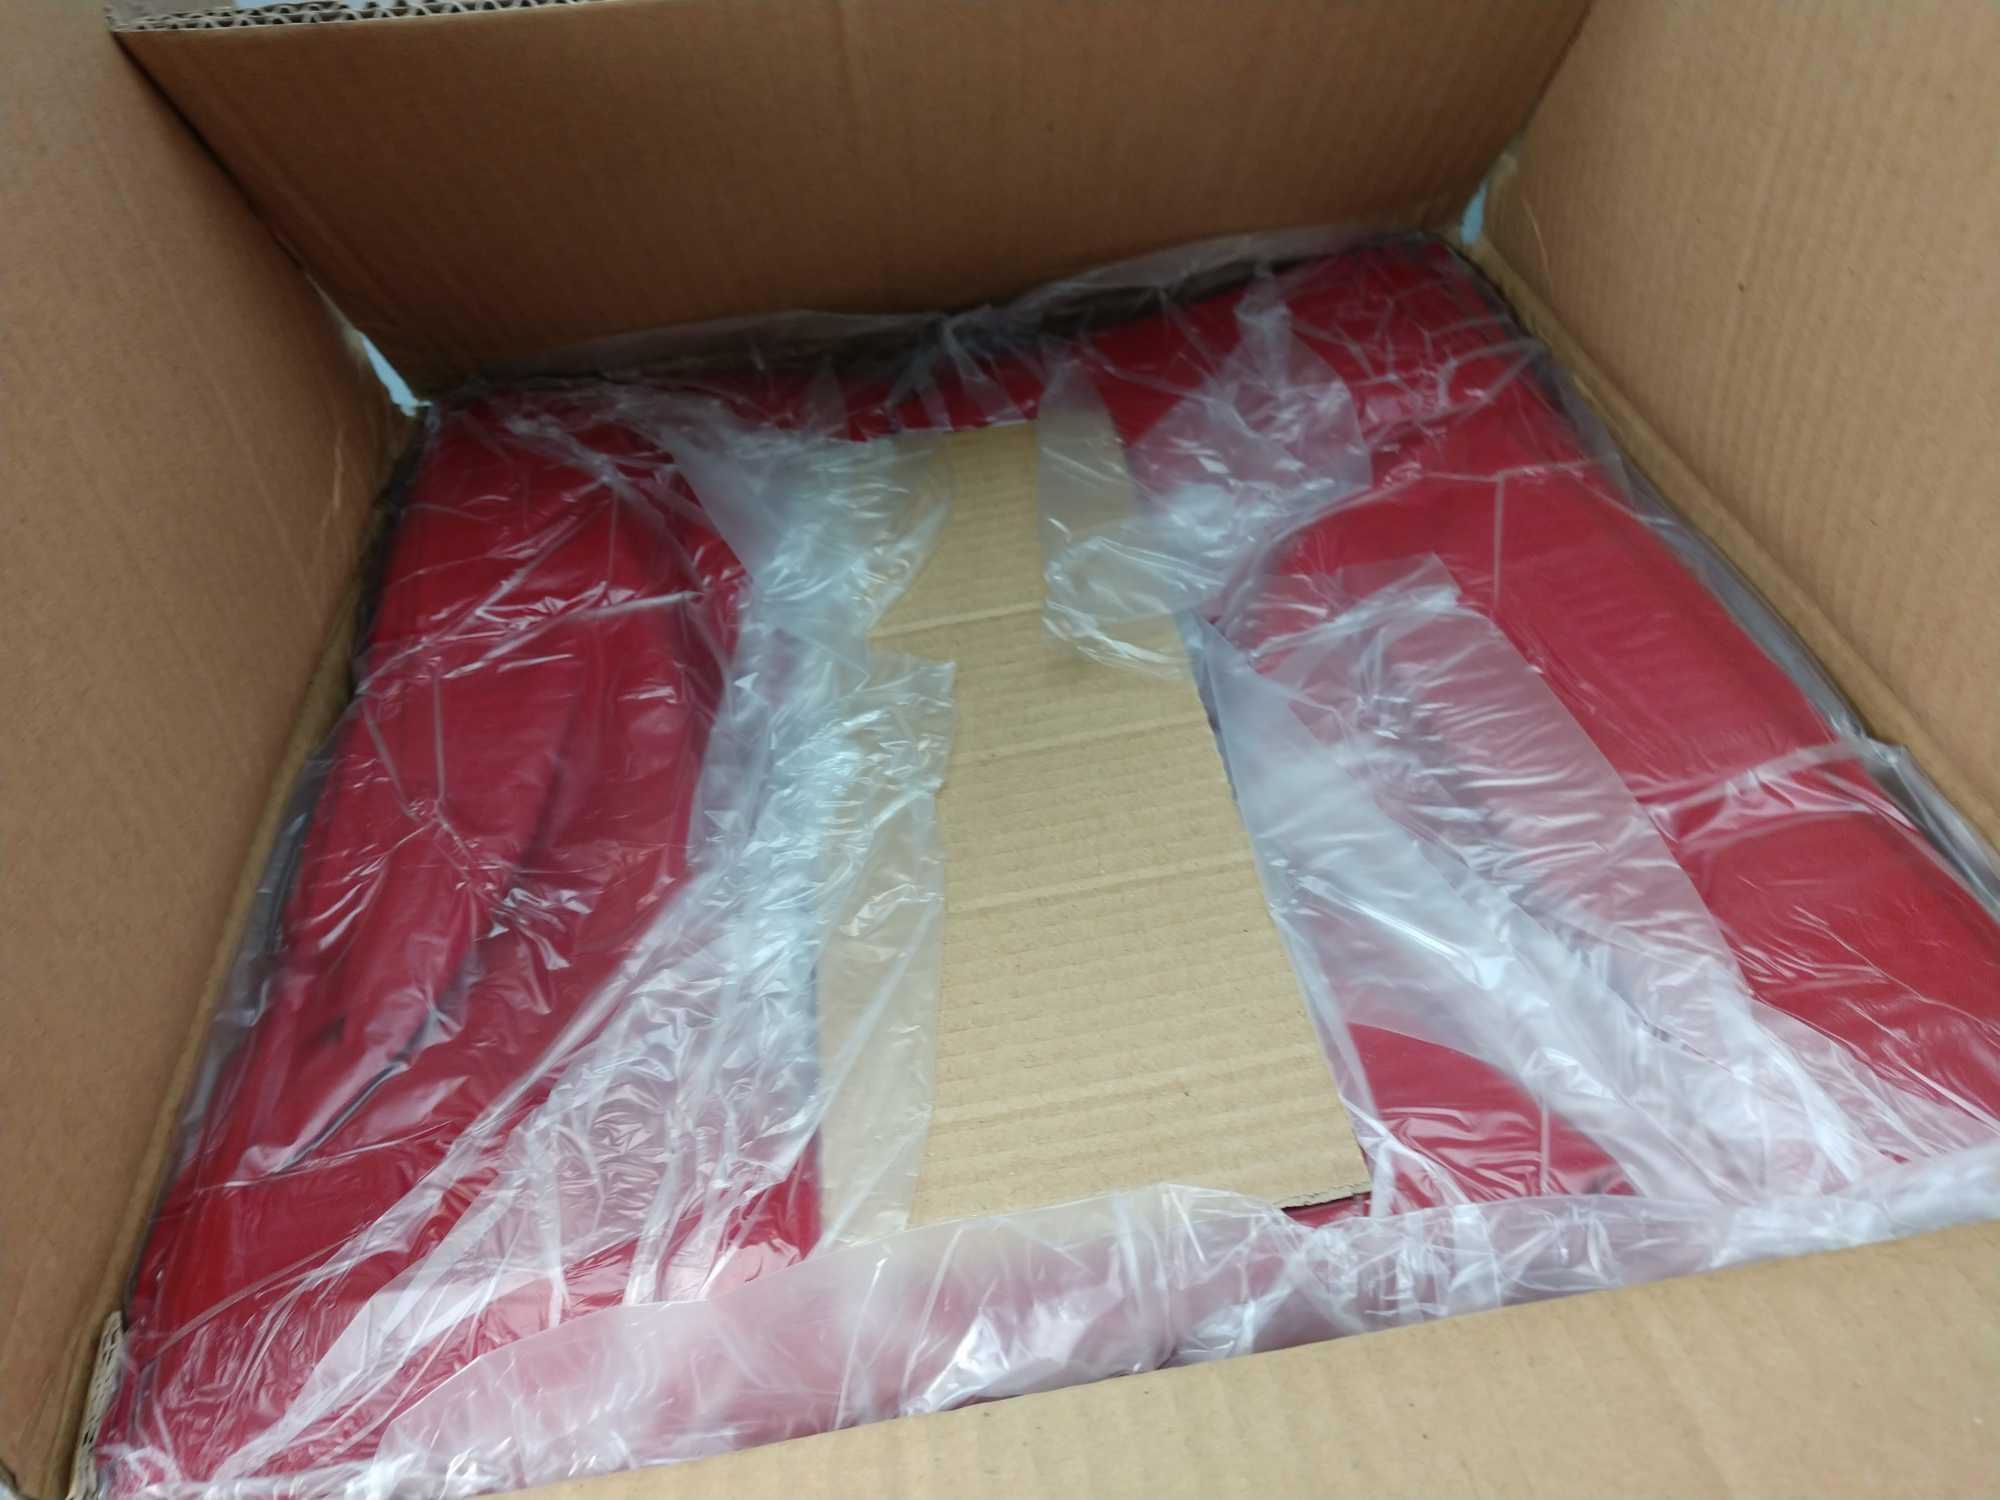 120 NEW Trifecta Linens Red 42in X 42in Tablecloths